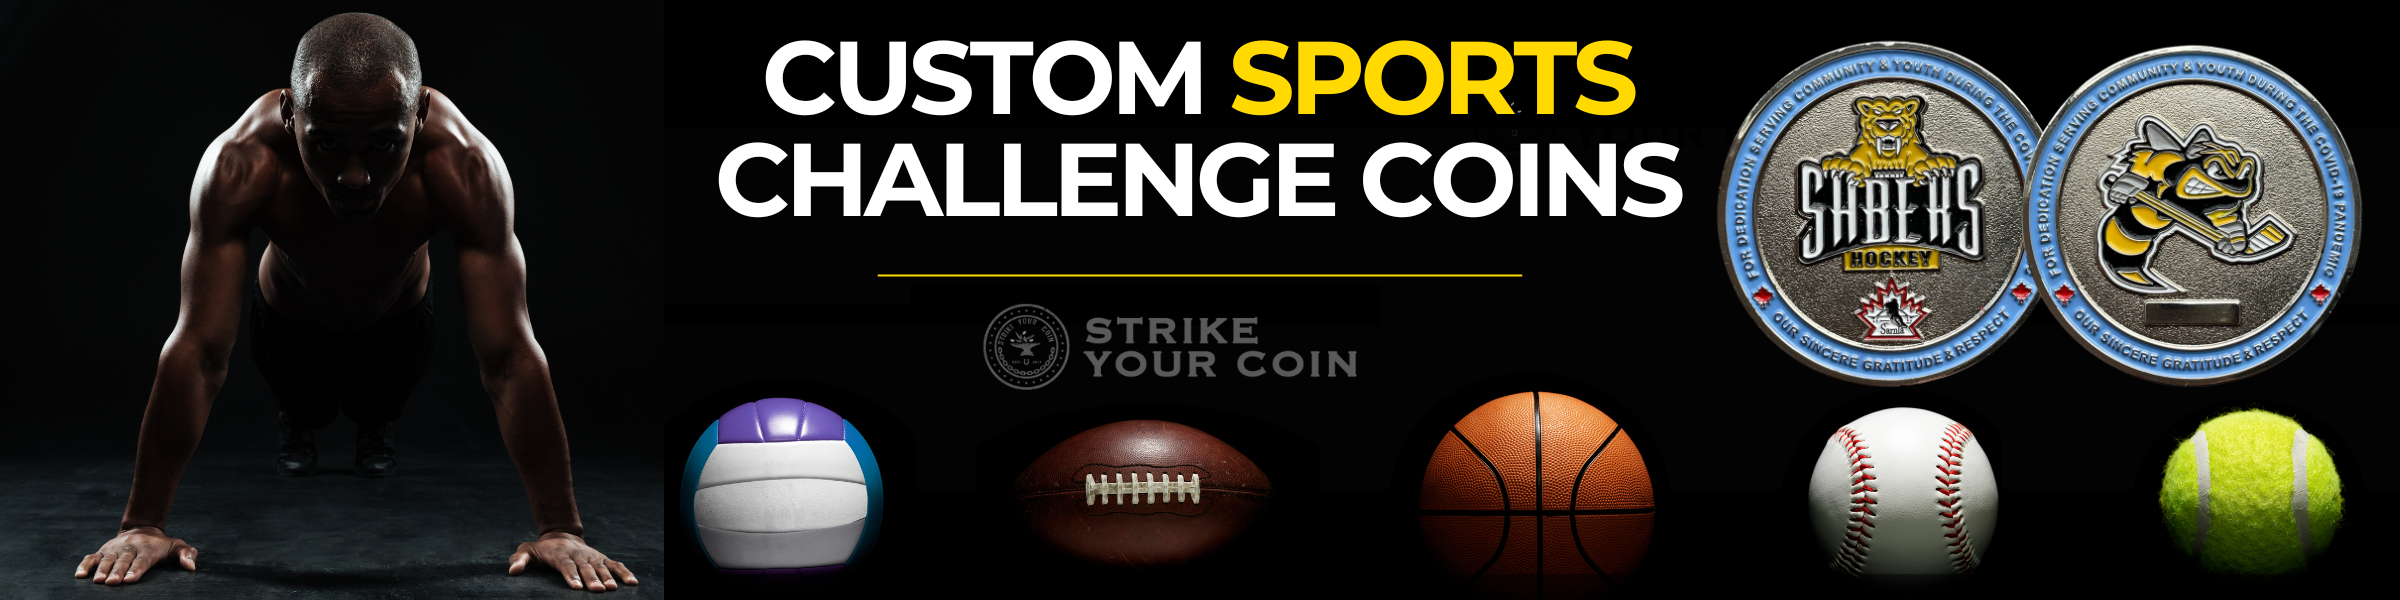 banner with an athlete custom coins and balls from various sports